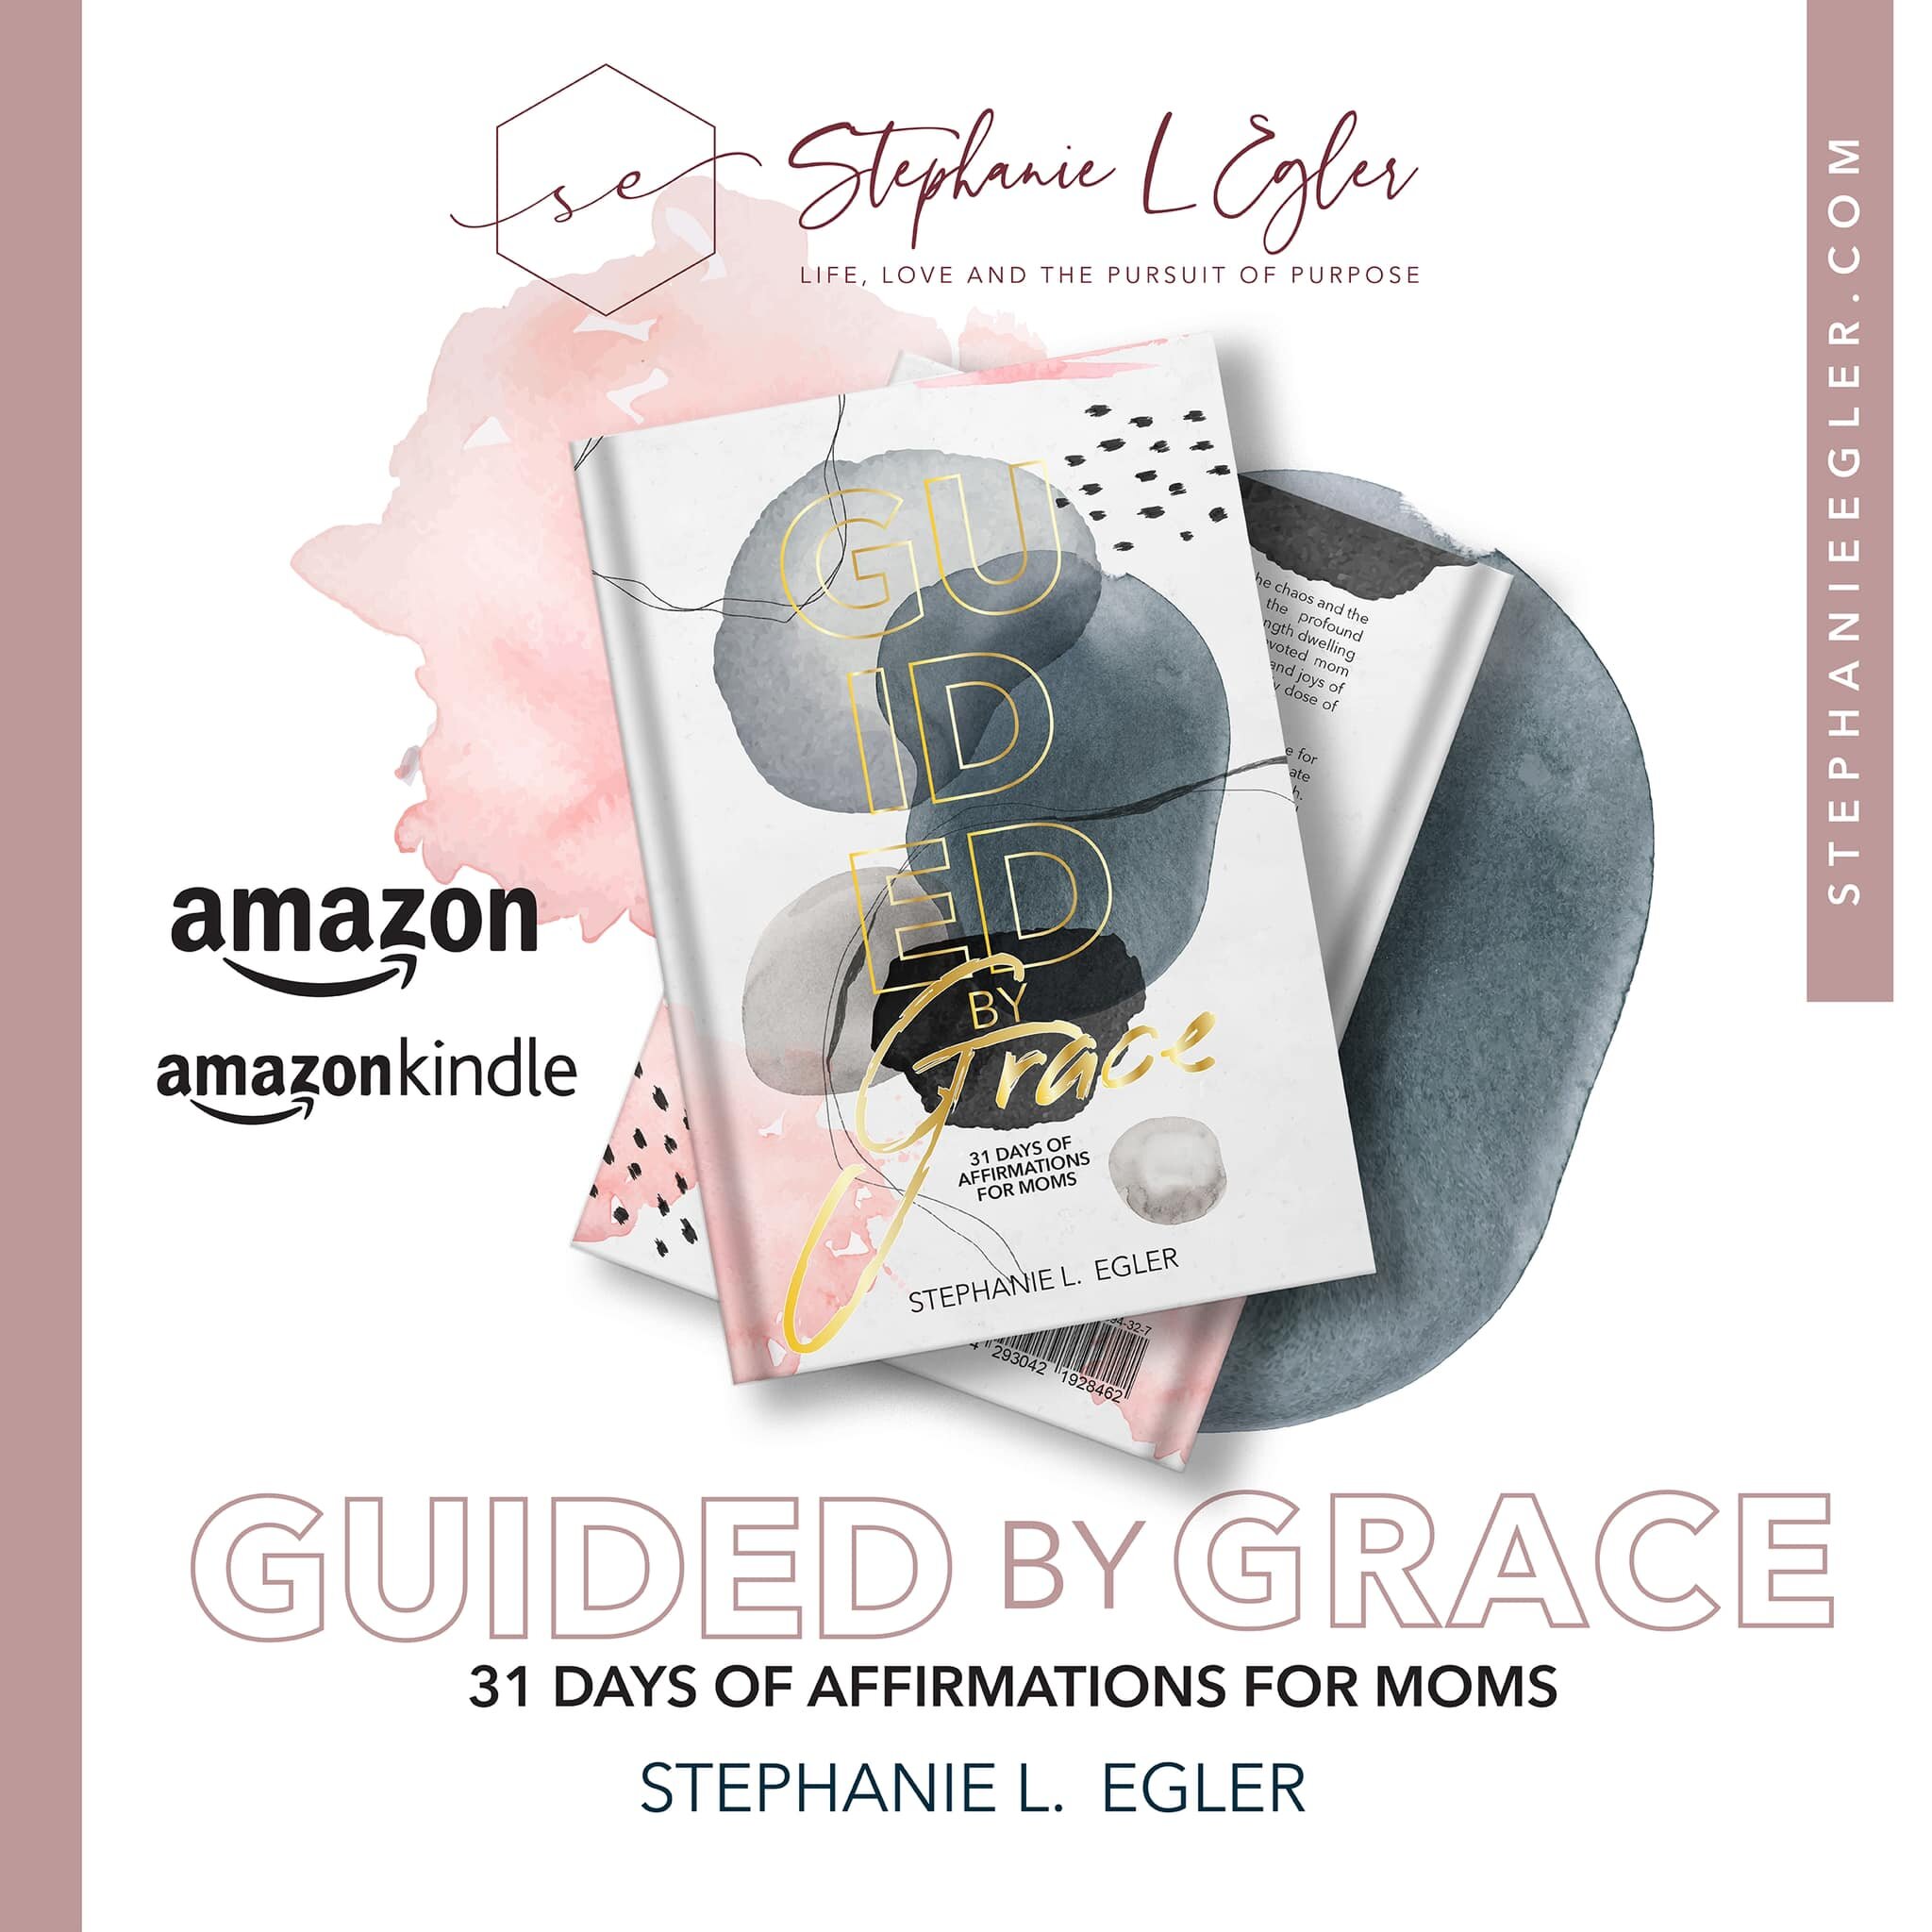 Before turning 40, I set out to write and release my first book. I&rsquo;m proud to say, I did it! &quot;Guided By Grace: &ldquo;31 Days of Devotions for Moms&rdquo; is officially available! 

Grab your copy or gift one to a mom you know.

Happy Birt